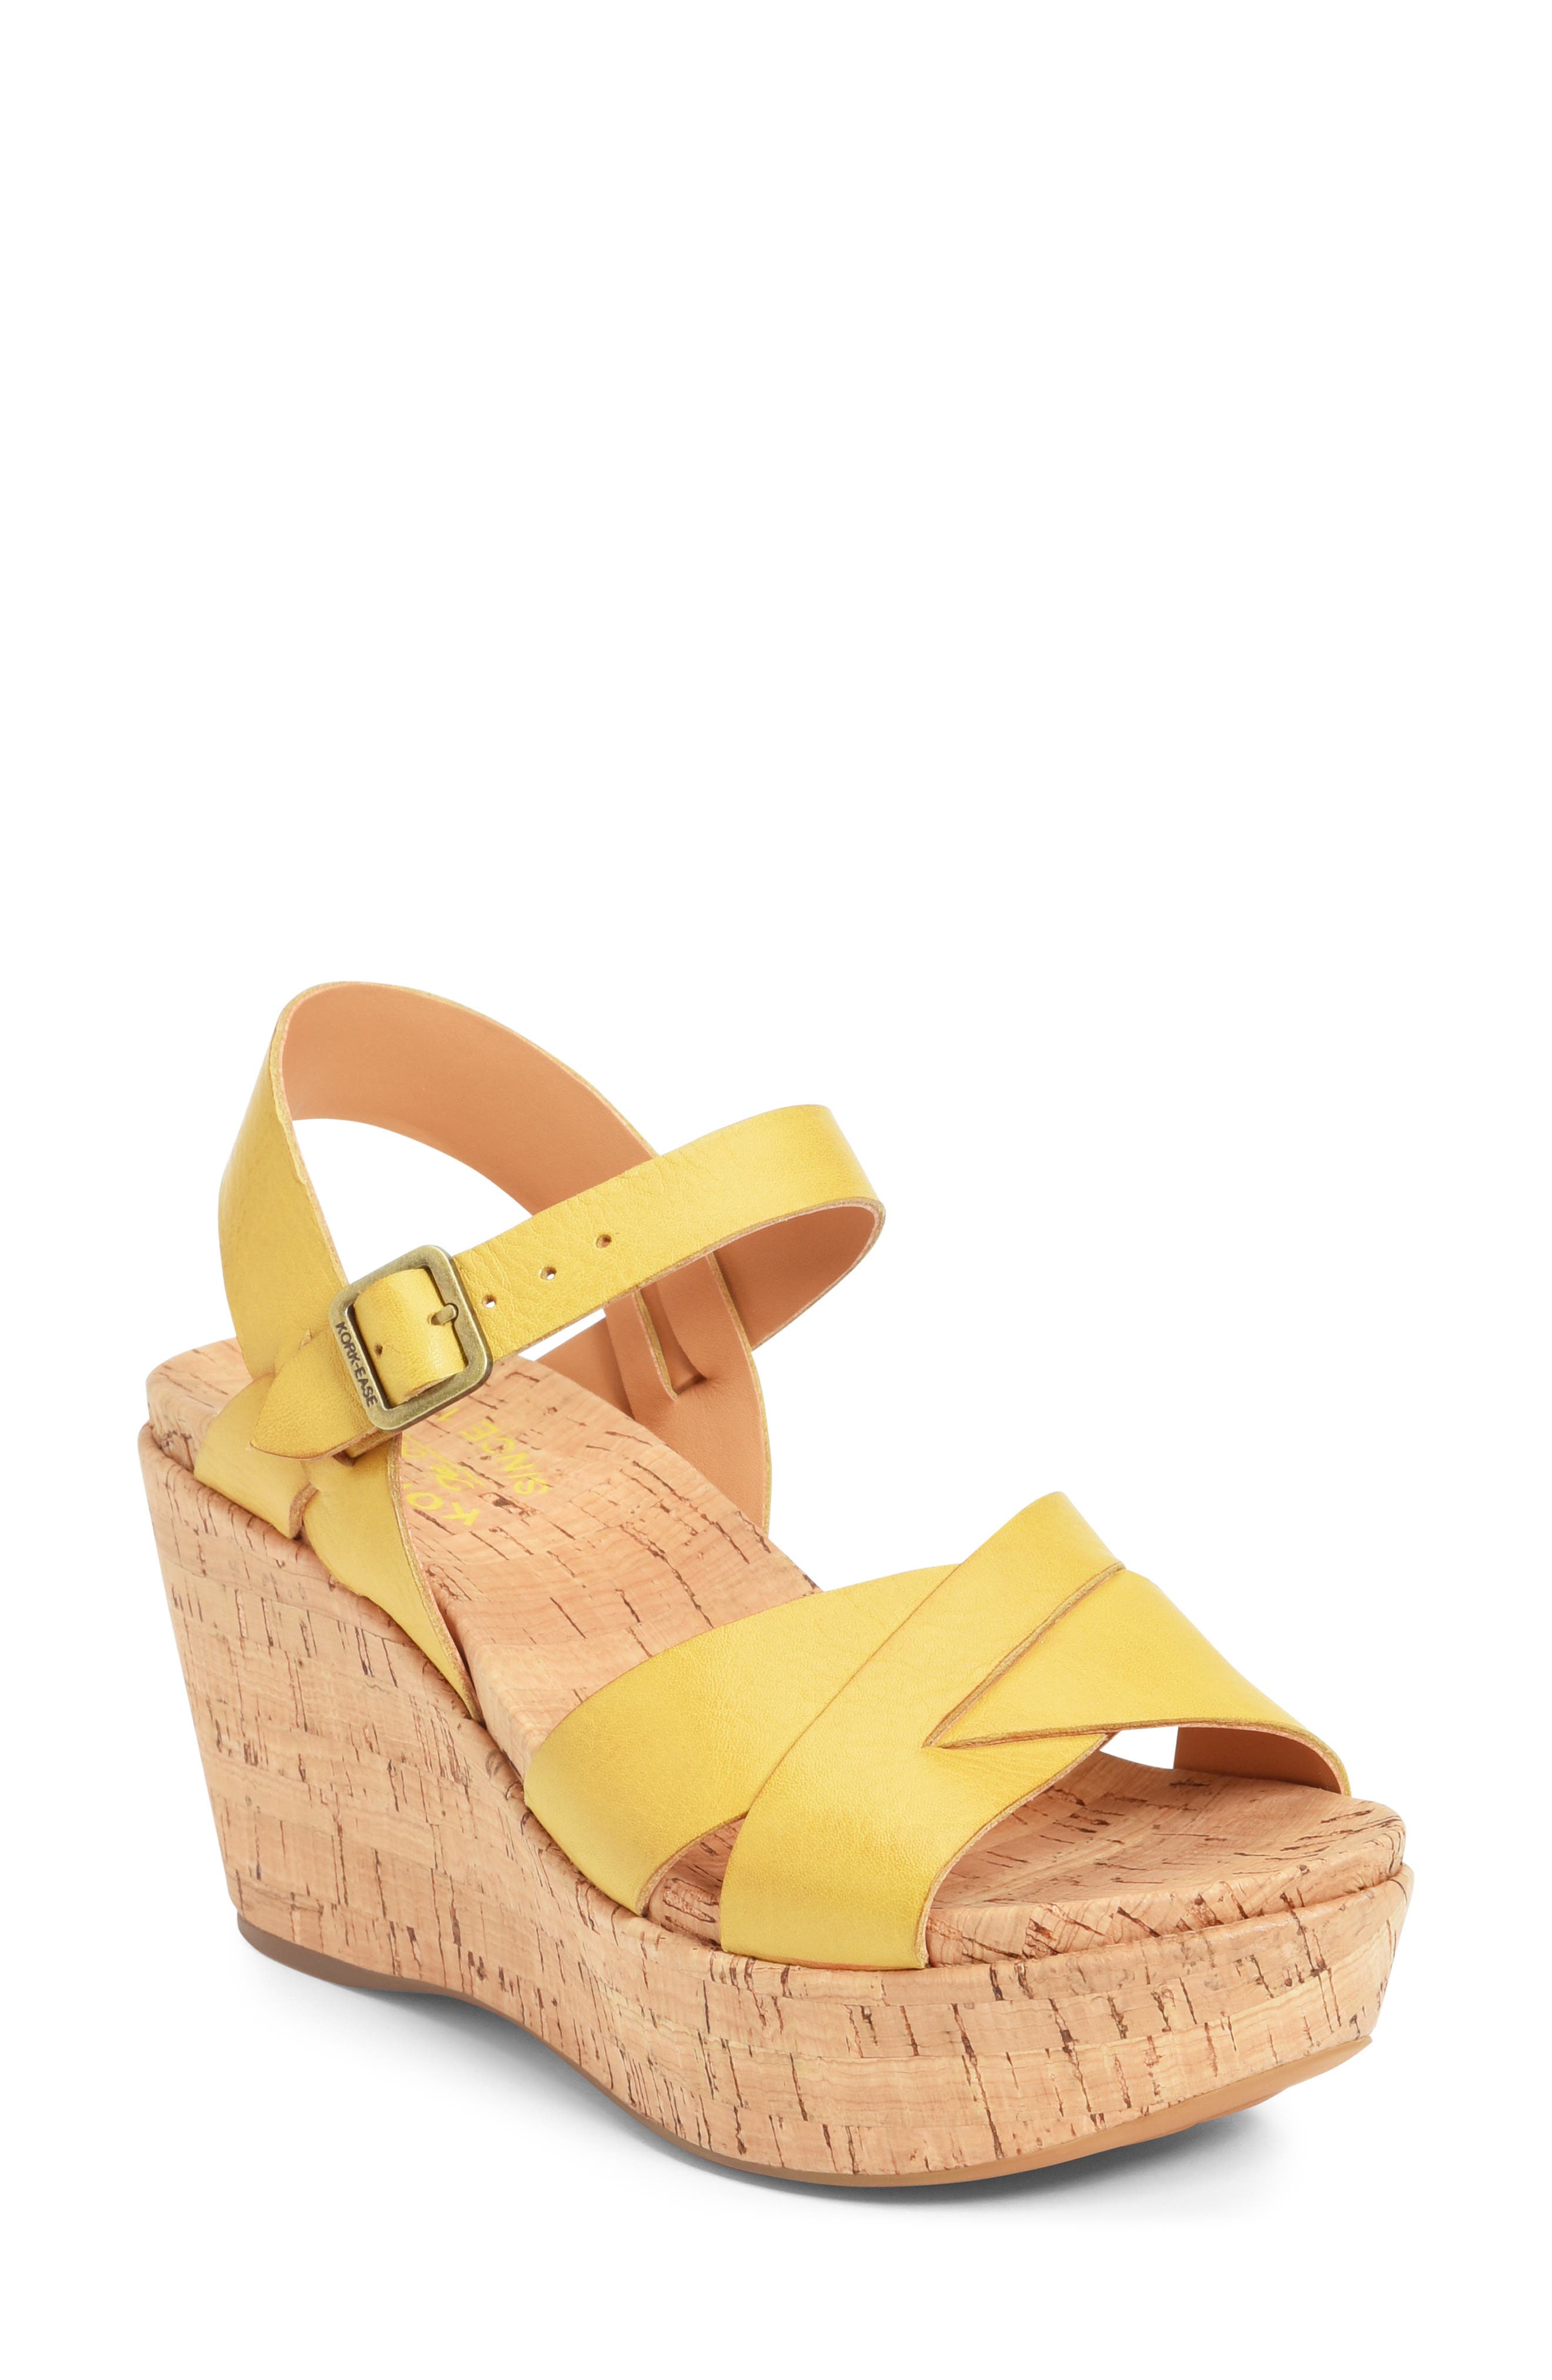 yellow wedge pumps